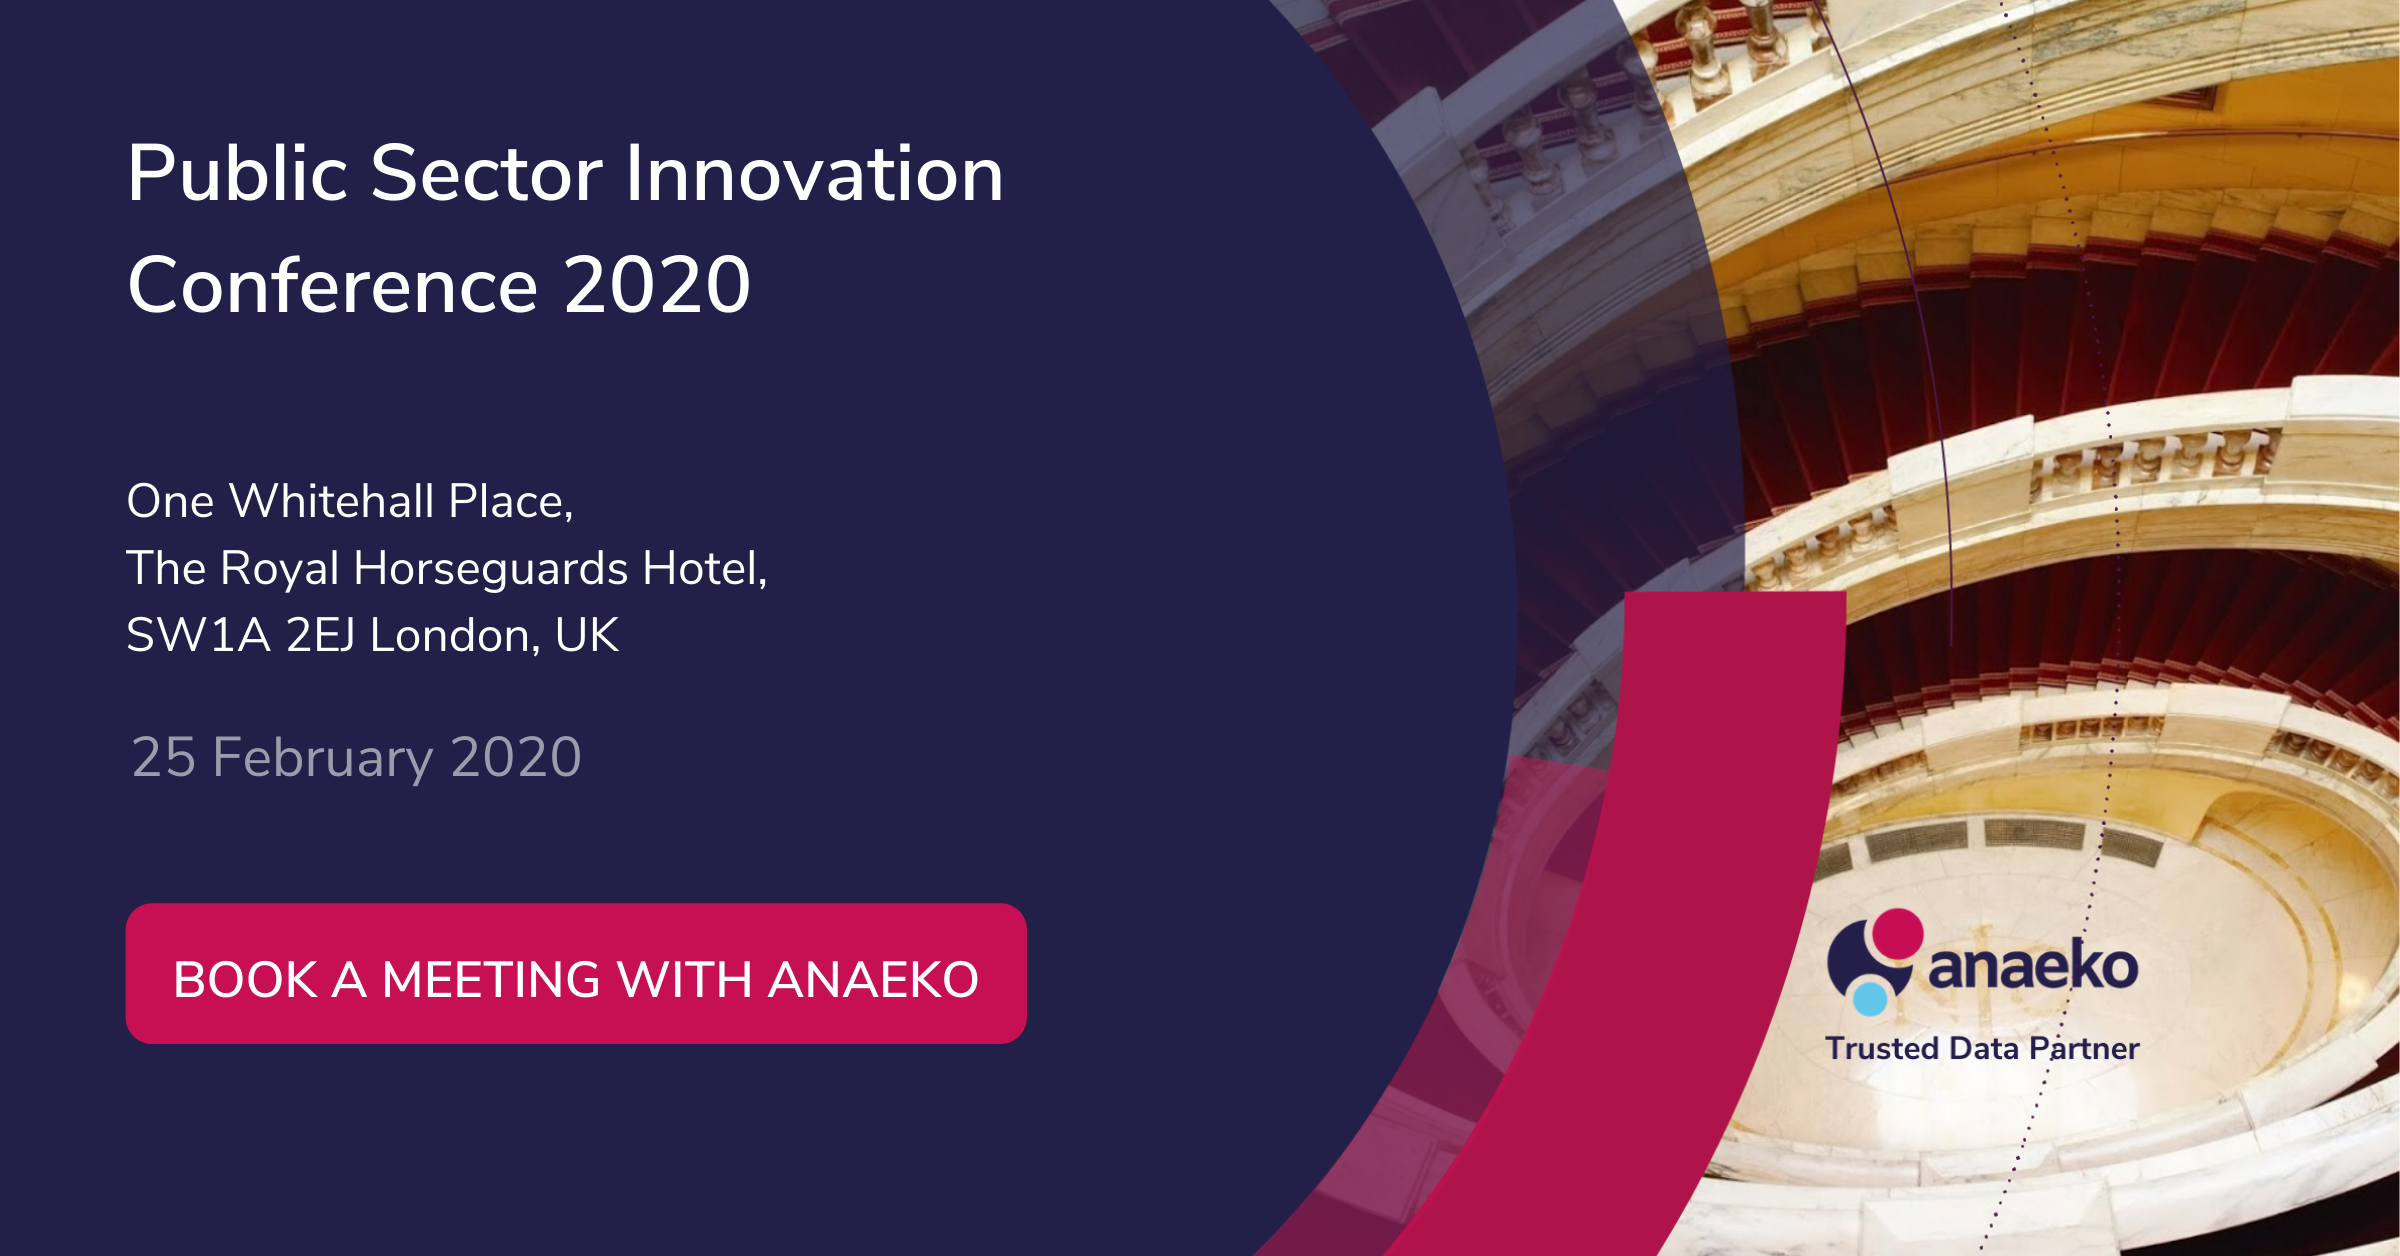 Meet with Anaeko at the Public Sector Innovation Conference 2020 in London